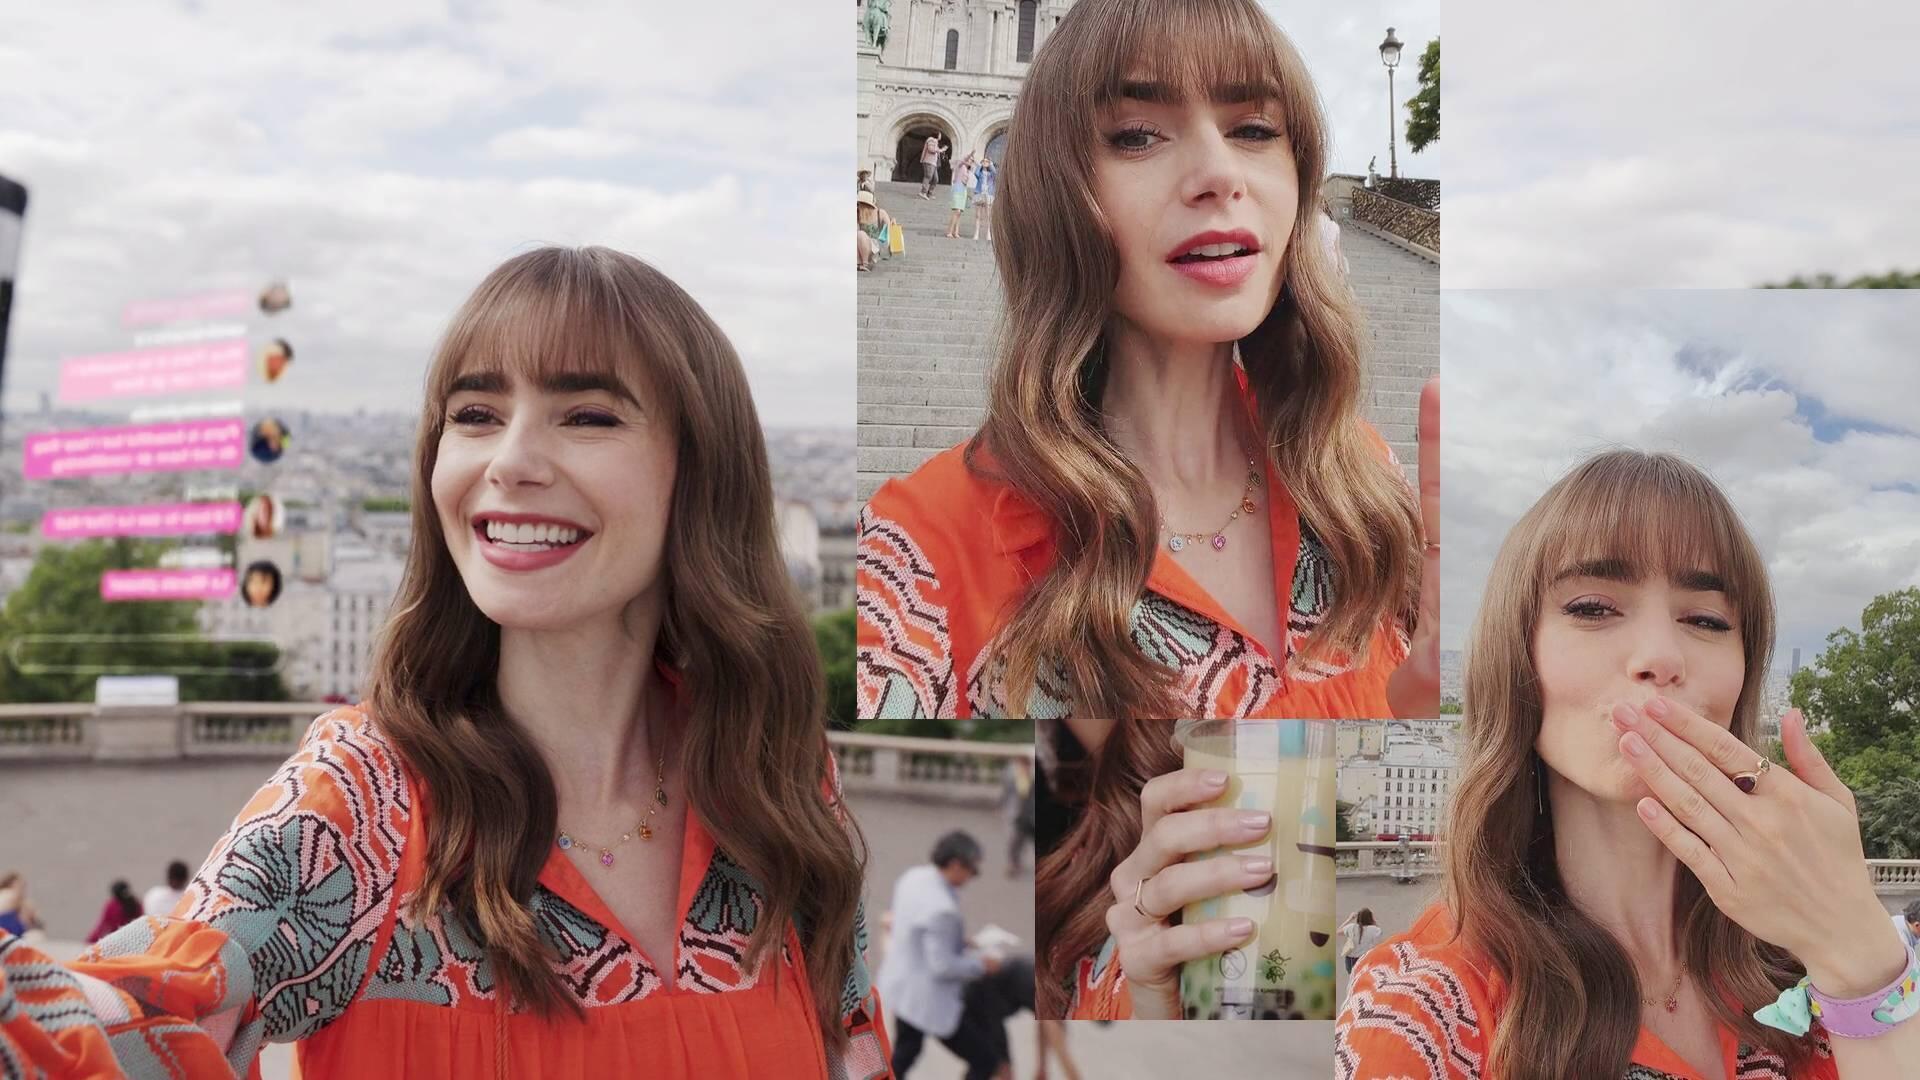 Lily Collins - Emily in Paris | Season 3 Episode 4 | Lily Collins style